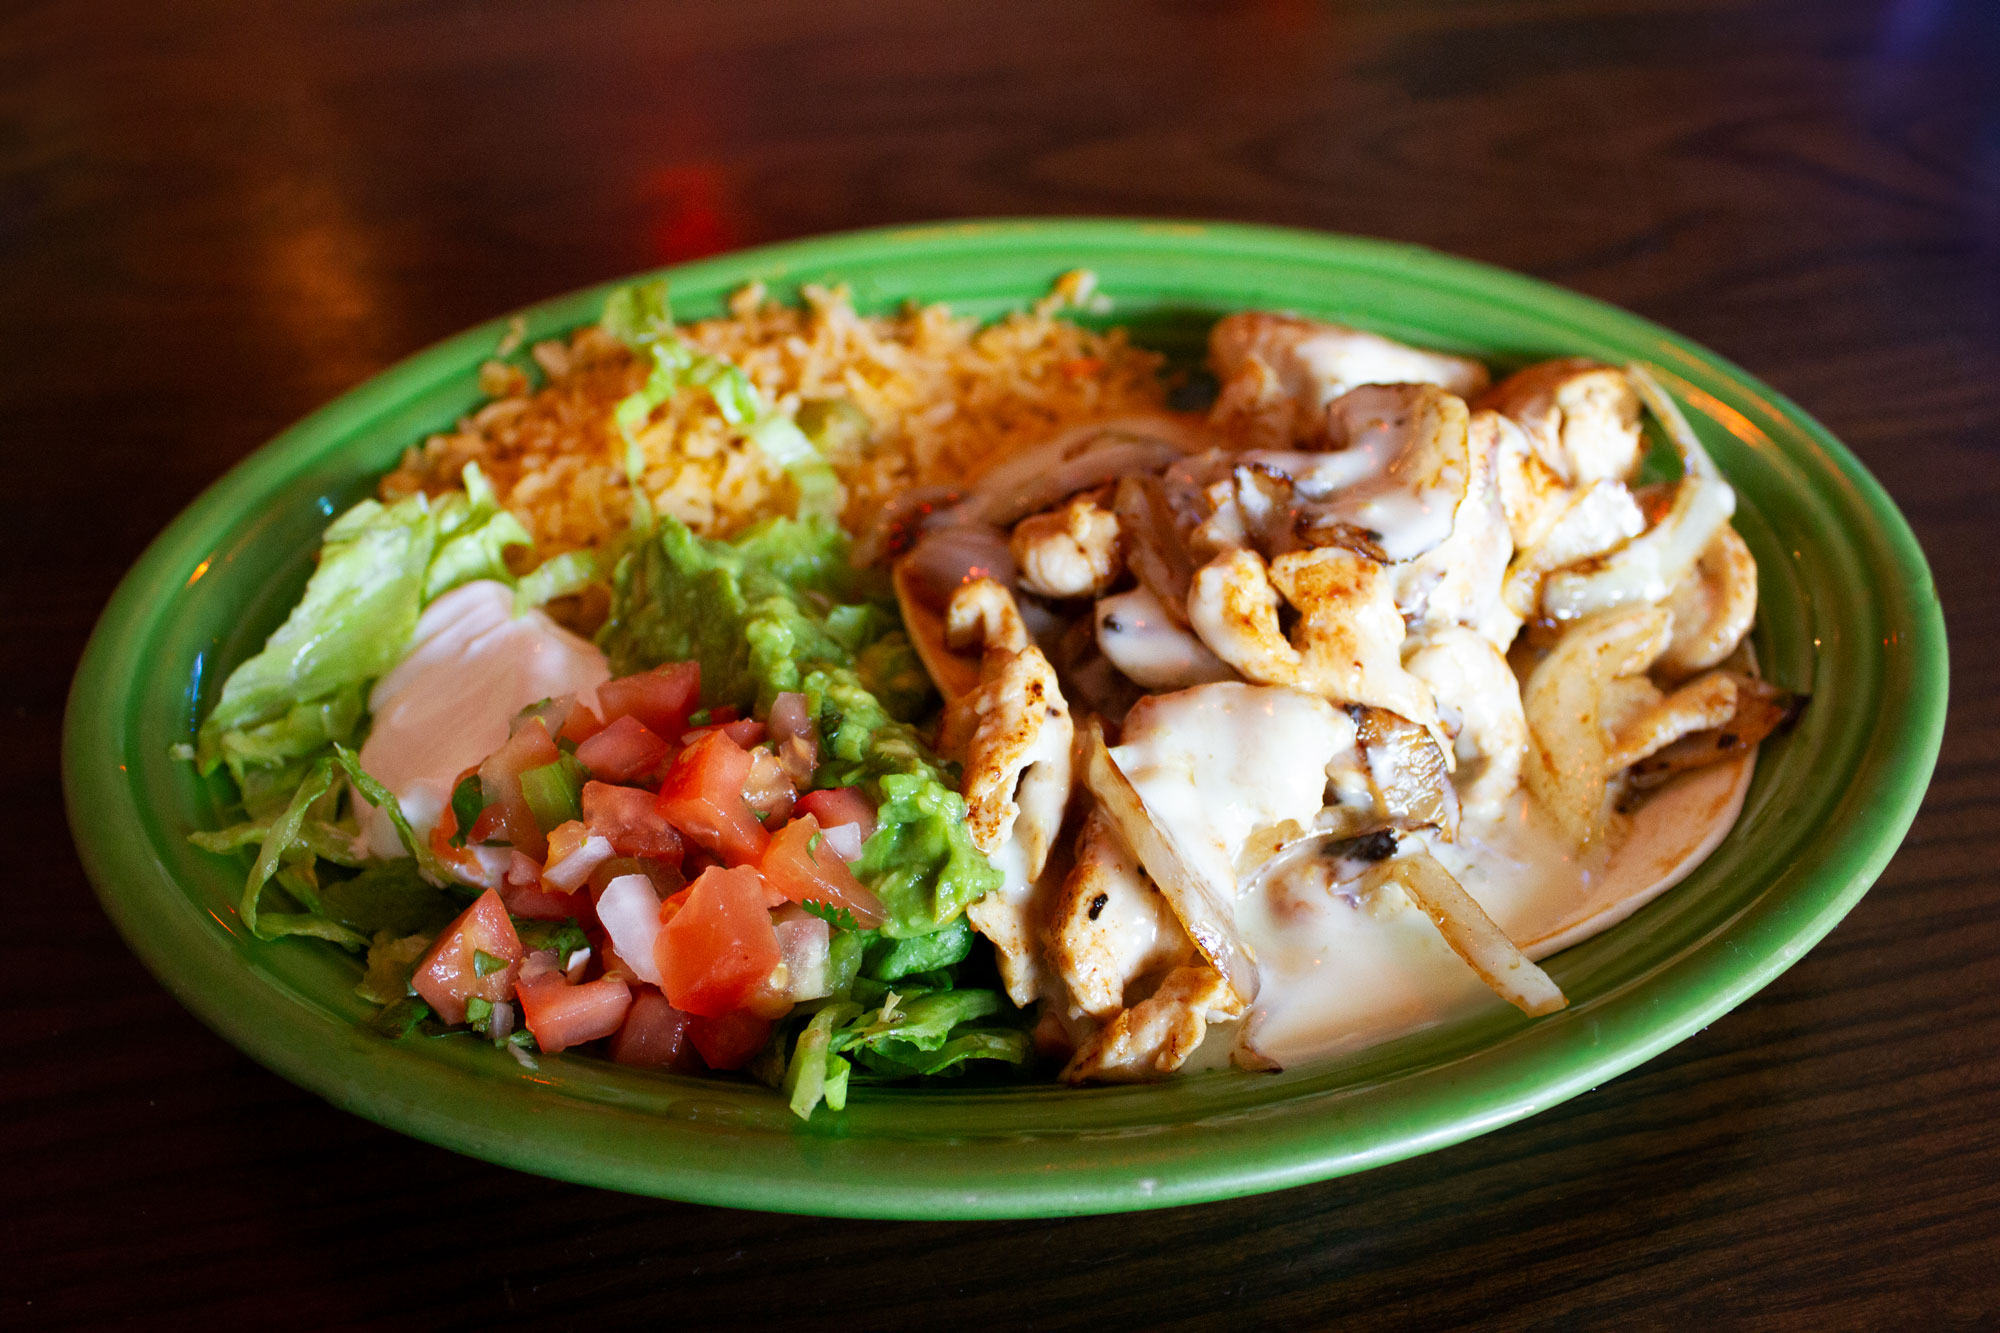 Acapulco chicken with Spanish rice and salad